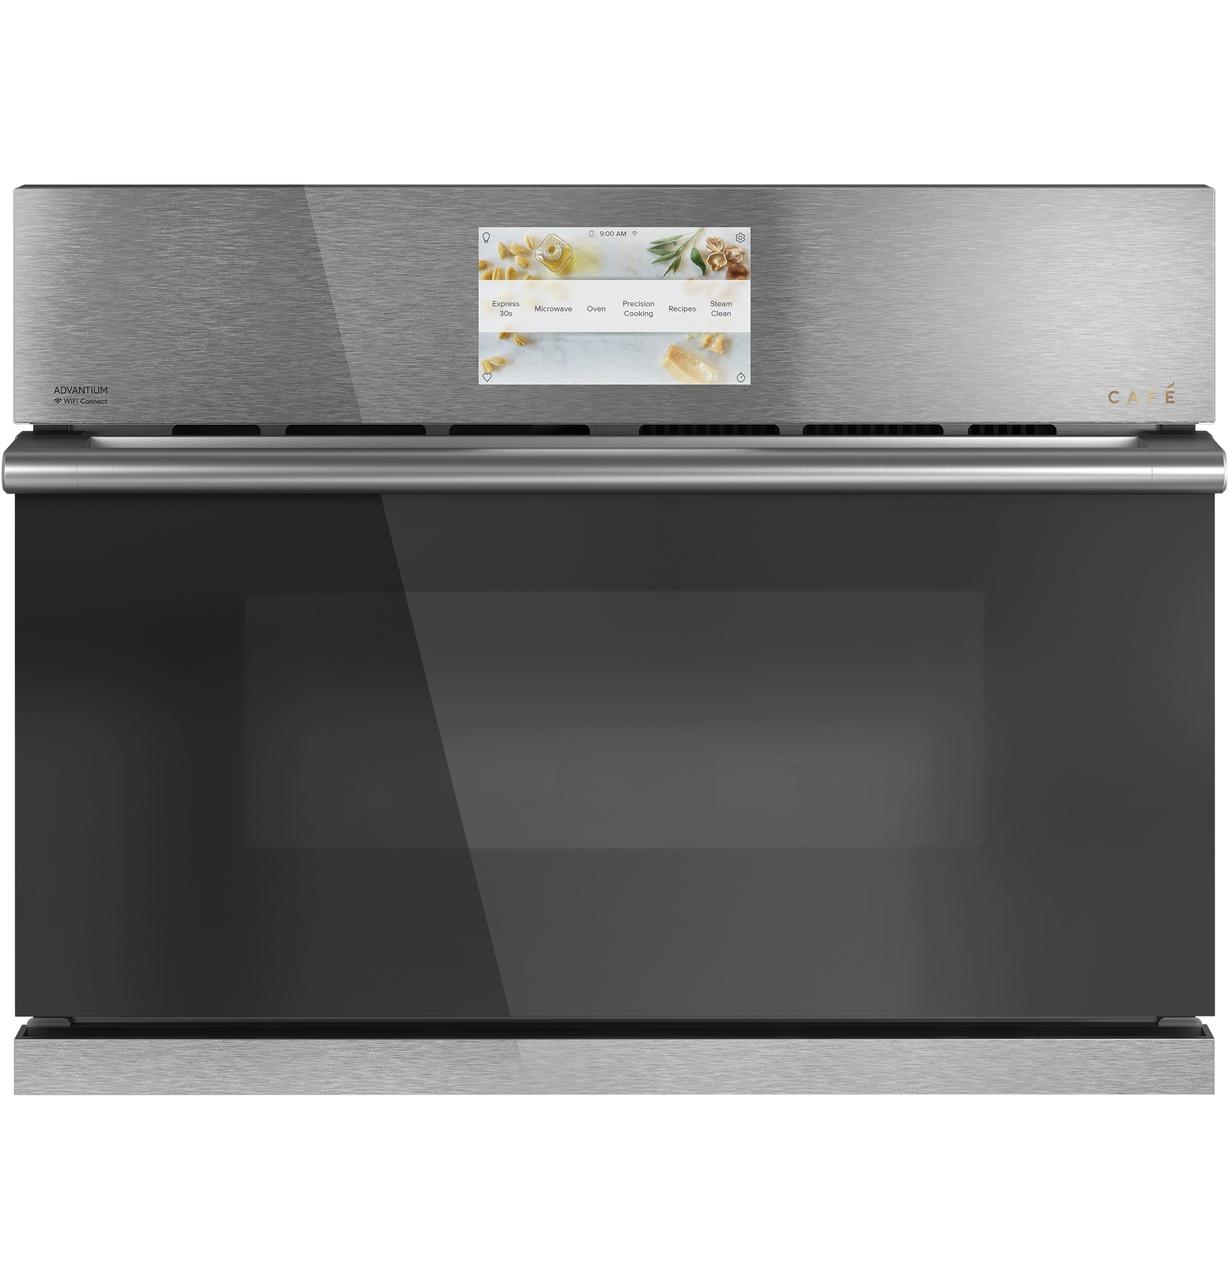 Cafe Caf(eback)™ 27" Smart Five in One Oven with 120V Advantium® Technology in Platinum Glass